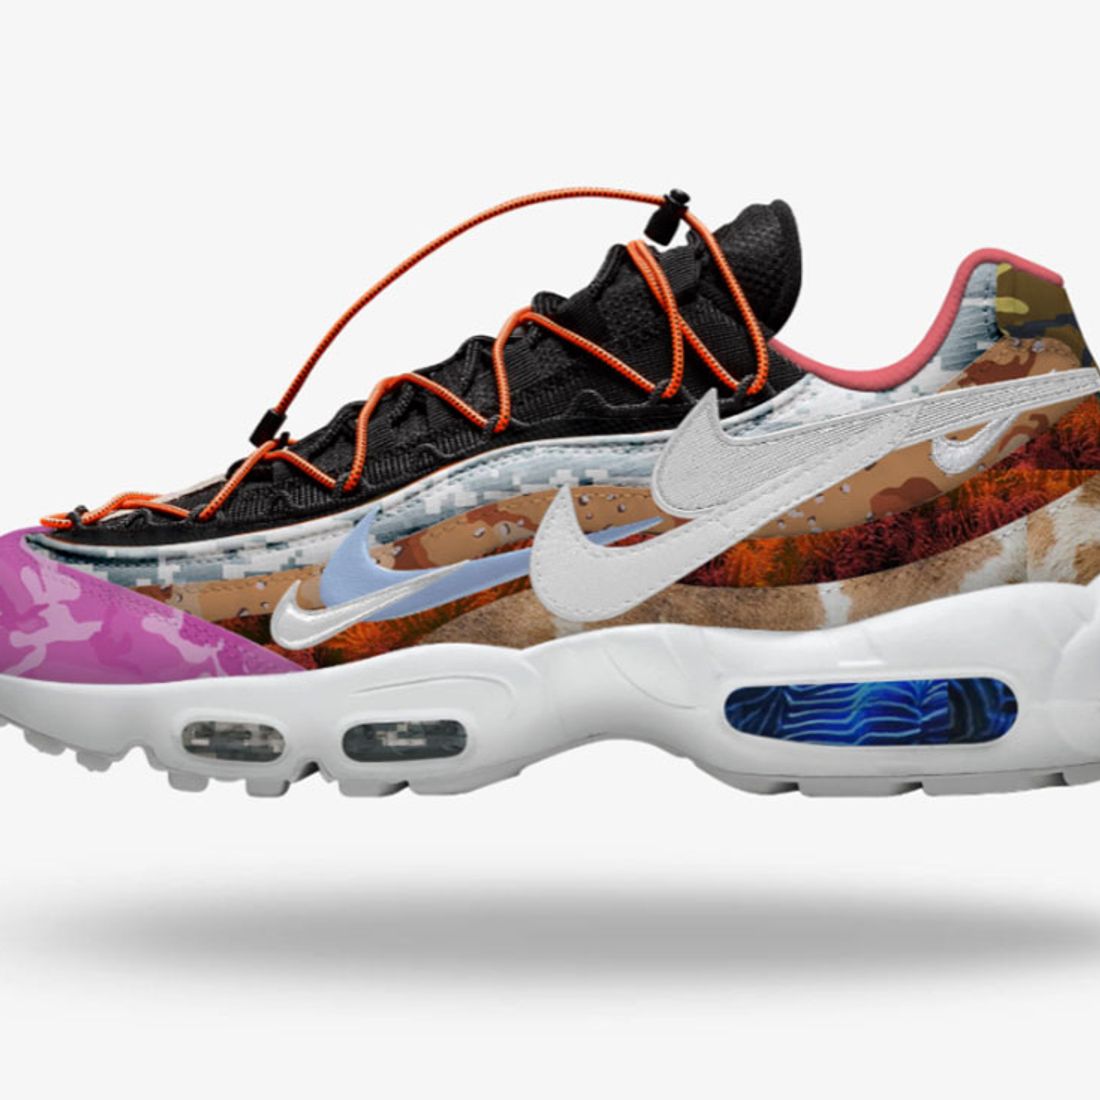 Desigualdad De todos modos Instalaciones Create Your Own Nike Air Max 95 at JD Sports to Win a Pair Designed by  ONEFOUR! - Sneaker Freaker